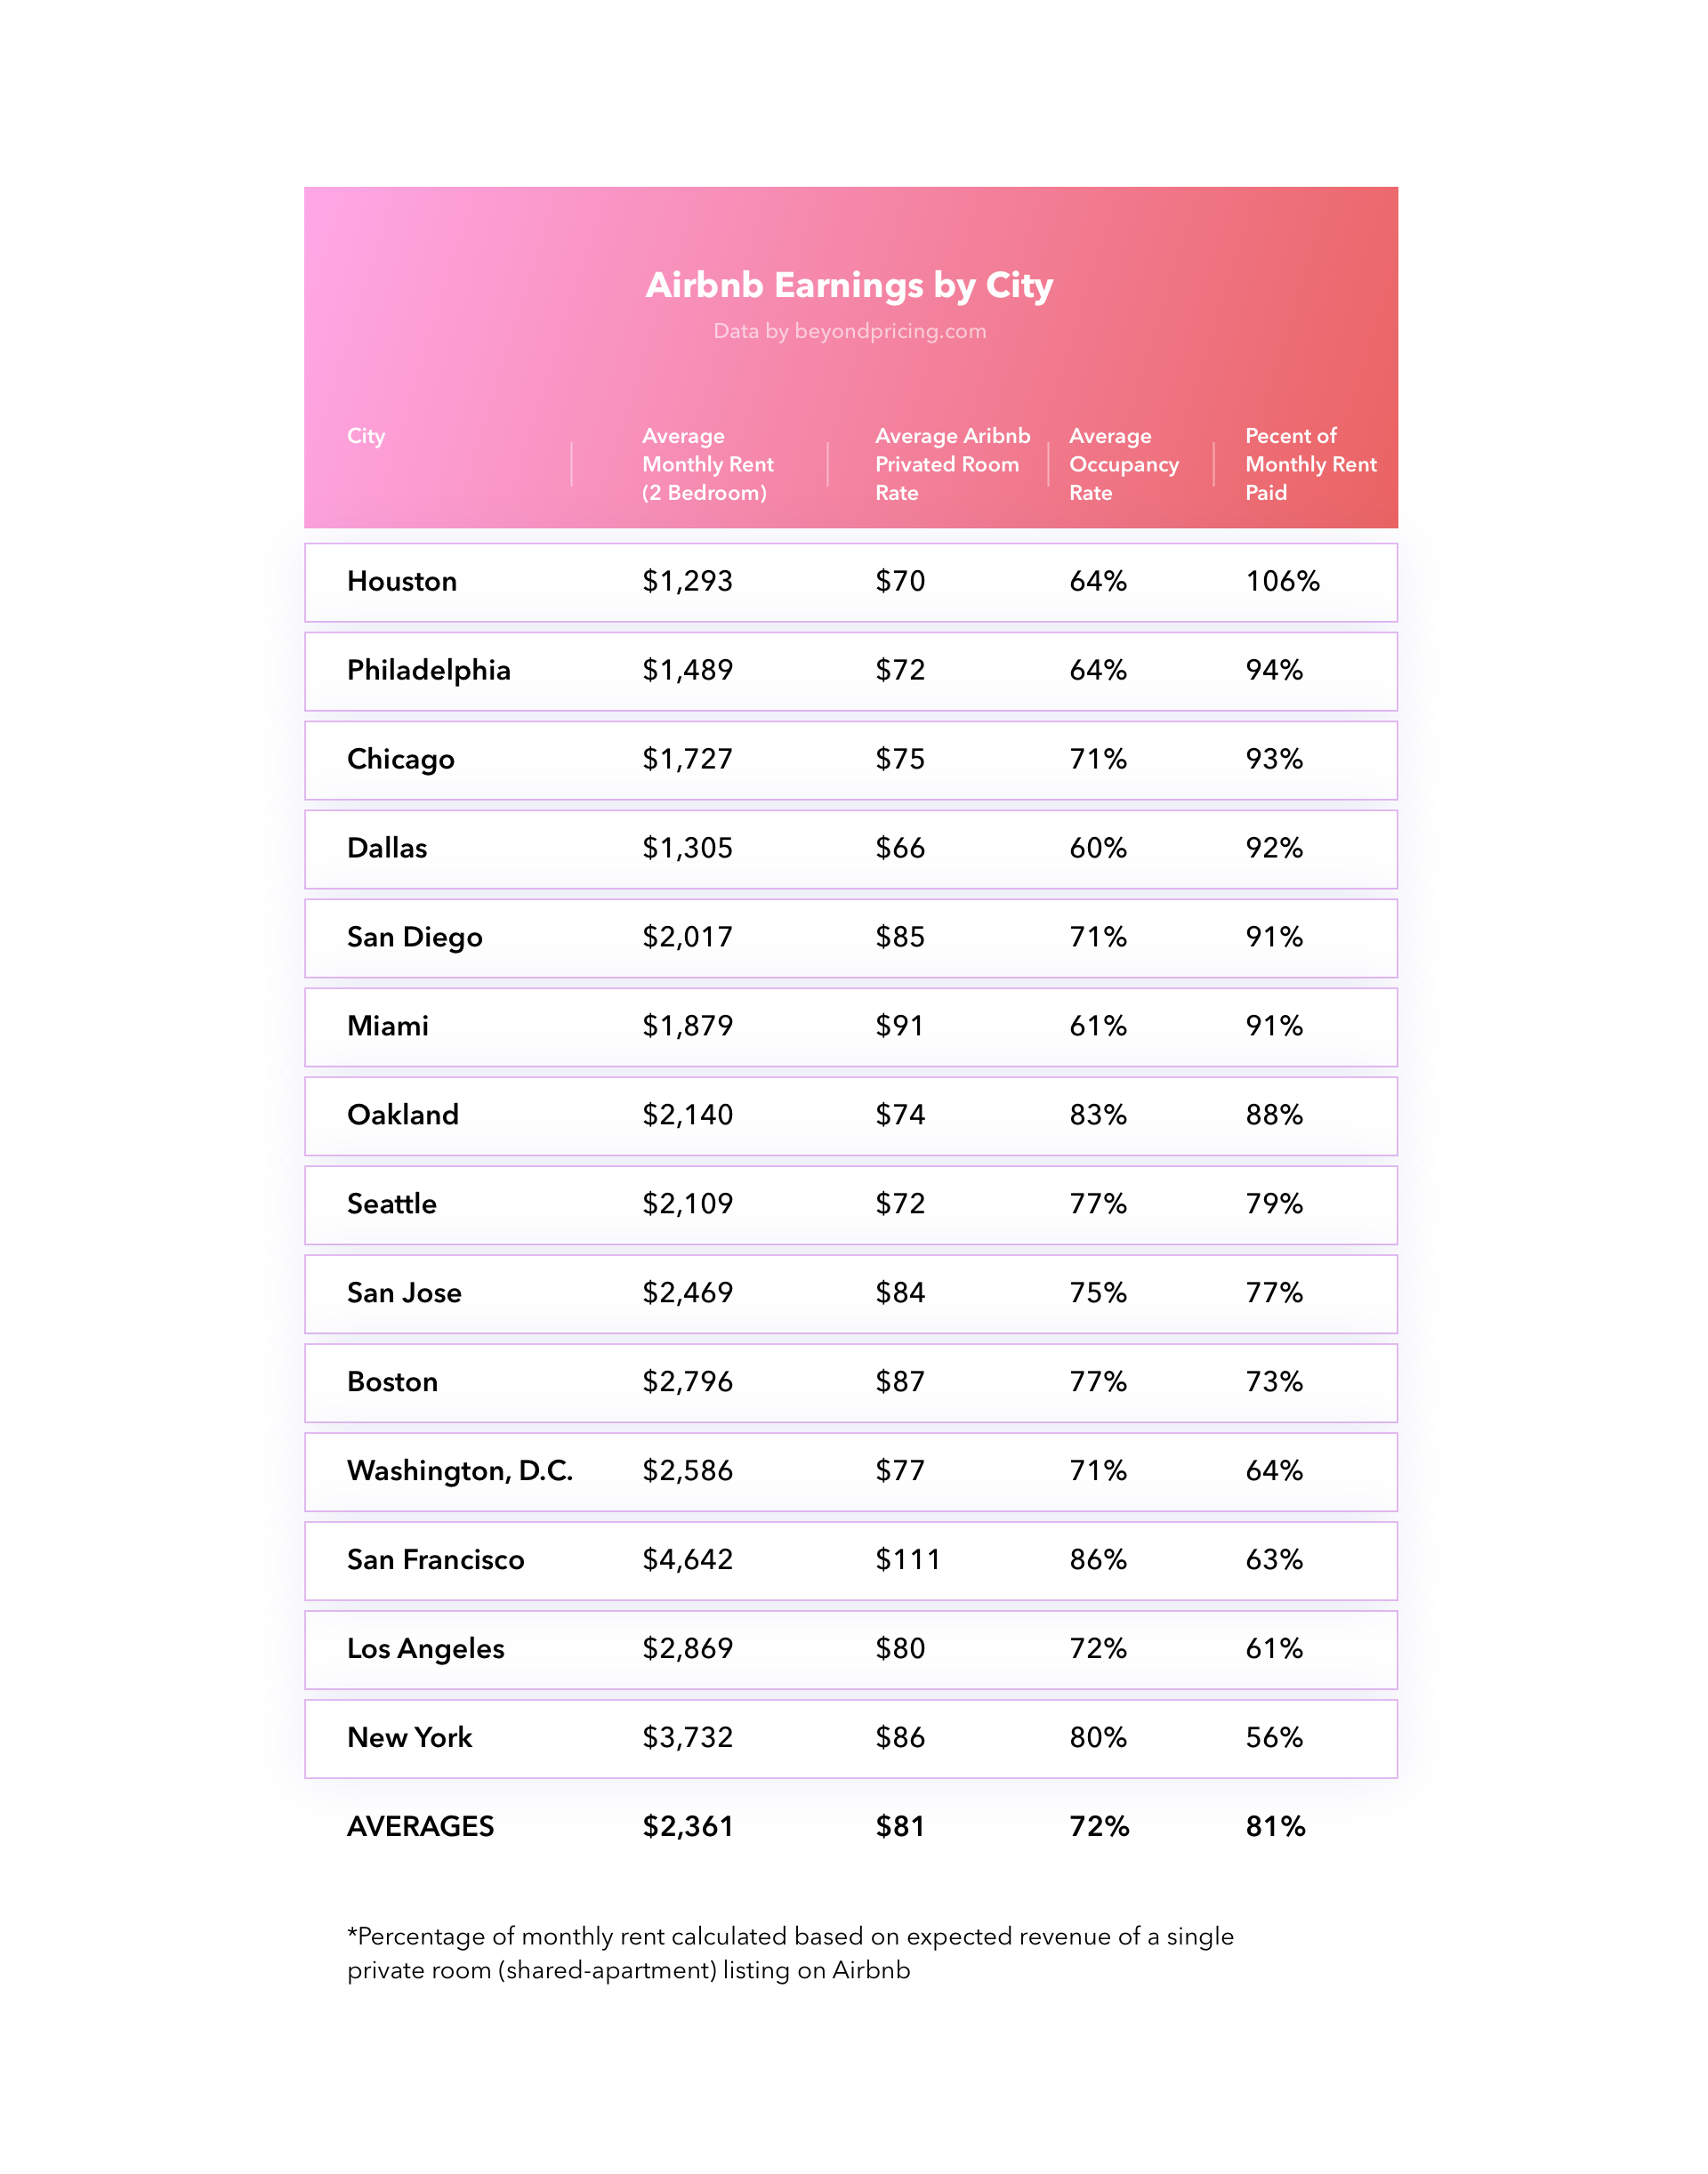 Airbnb average income by city